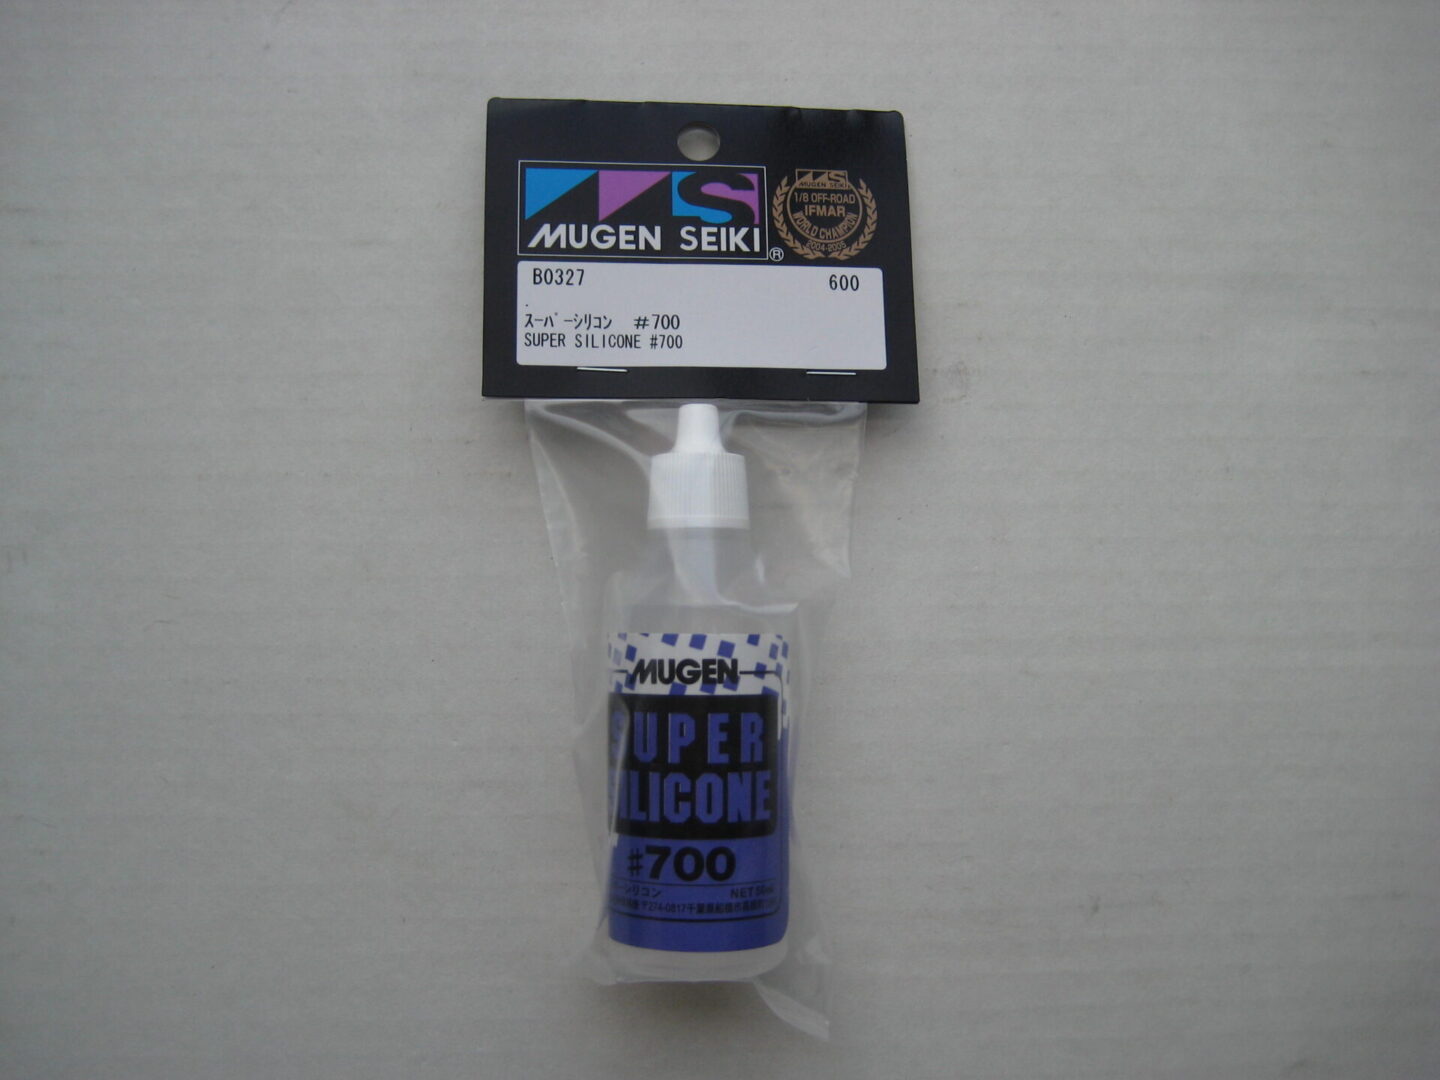 A package of blue ink for the mugen seiki.